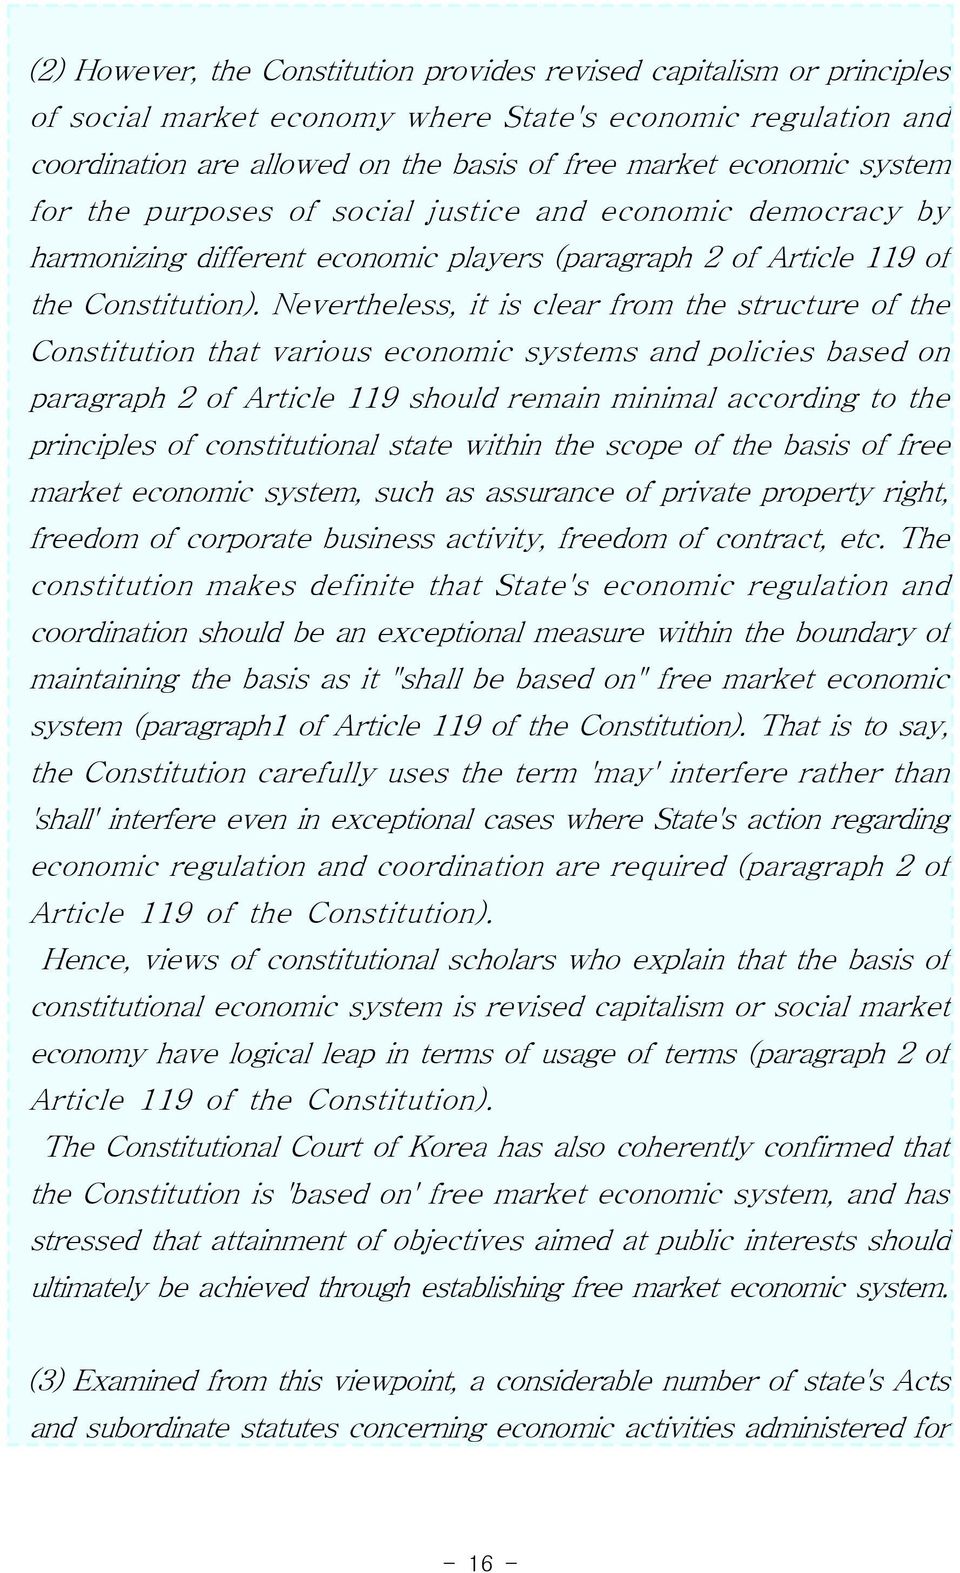 Nevertheless, it is clear from the structure of the Constitution that various economic systems and policies based on paragraph 2 of Article 119 should remain minimal according to the principles of